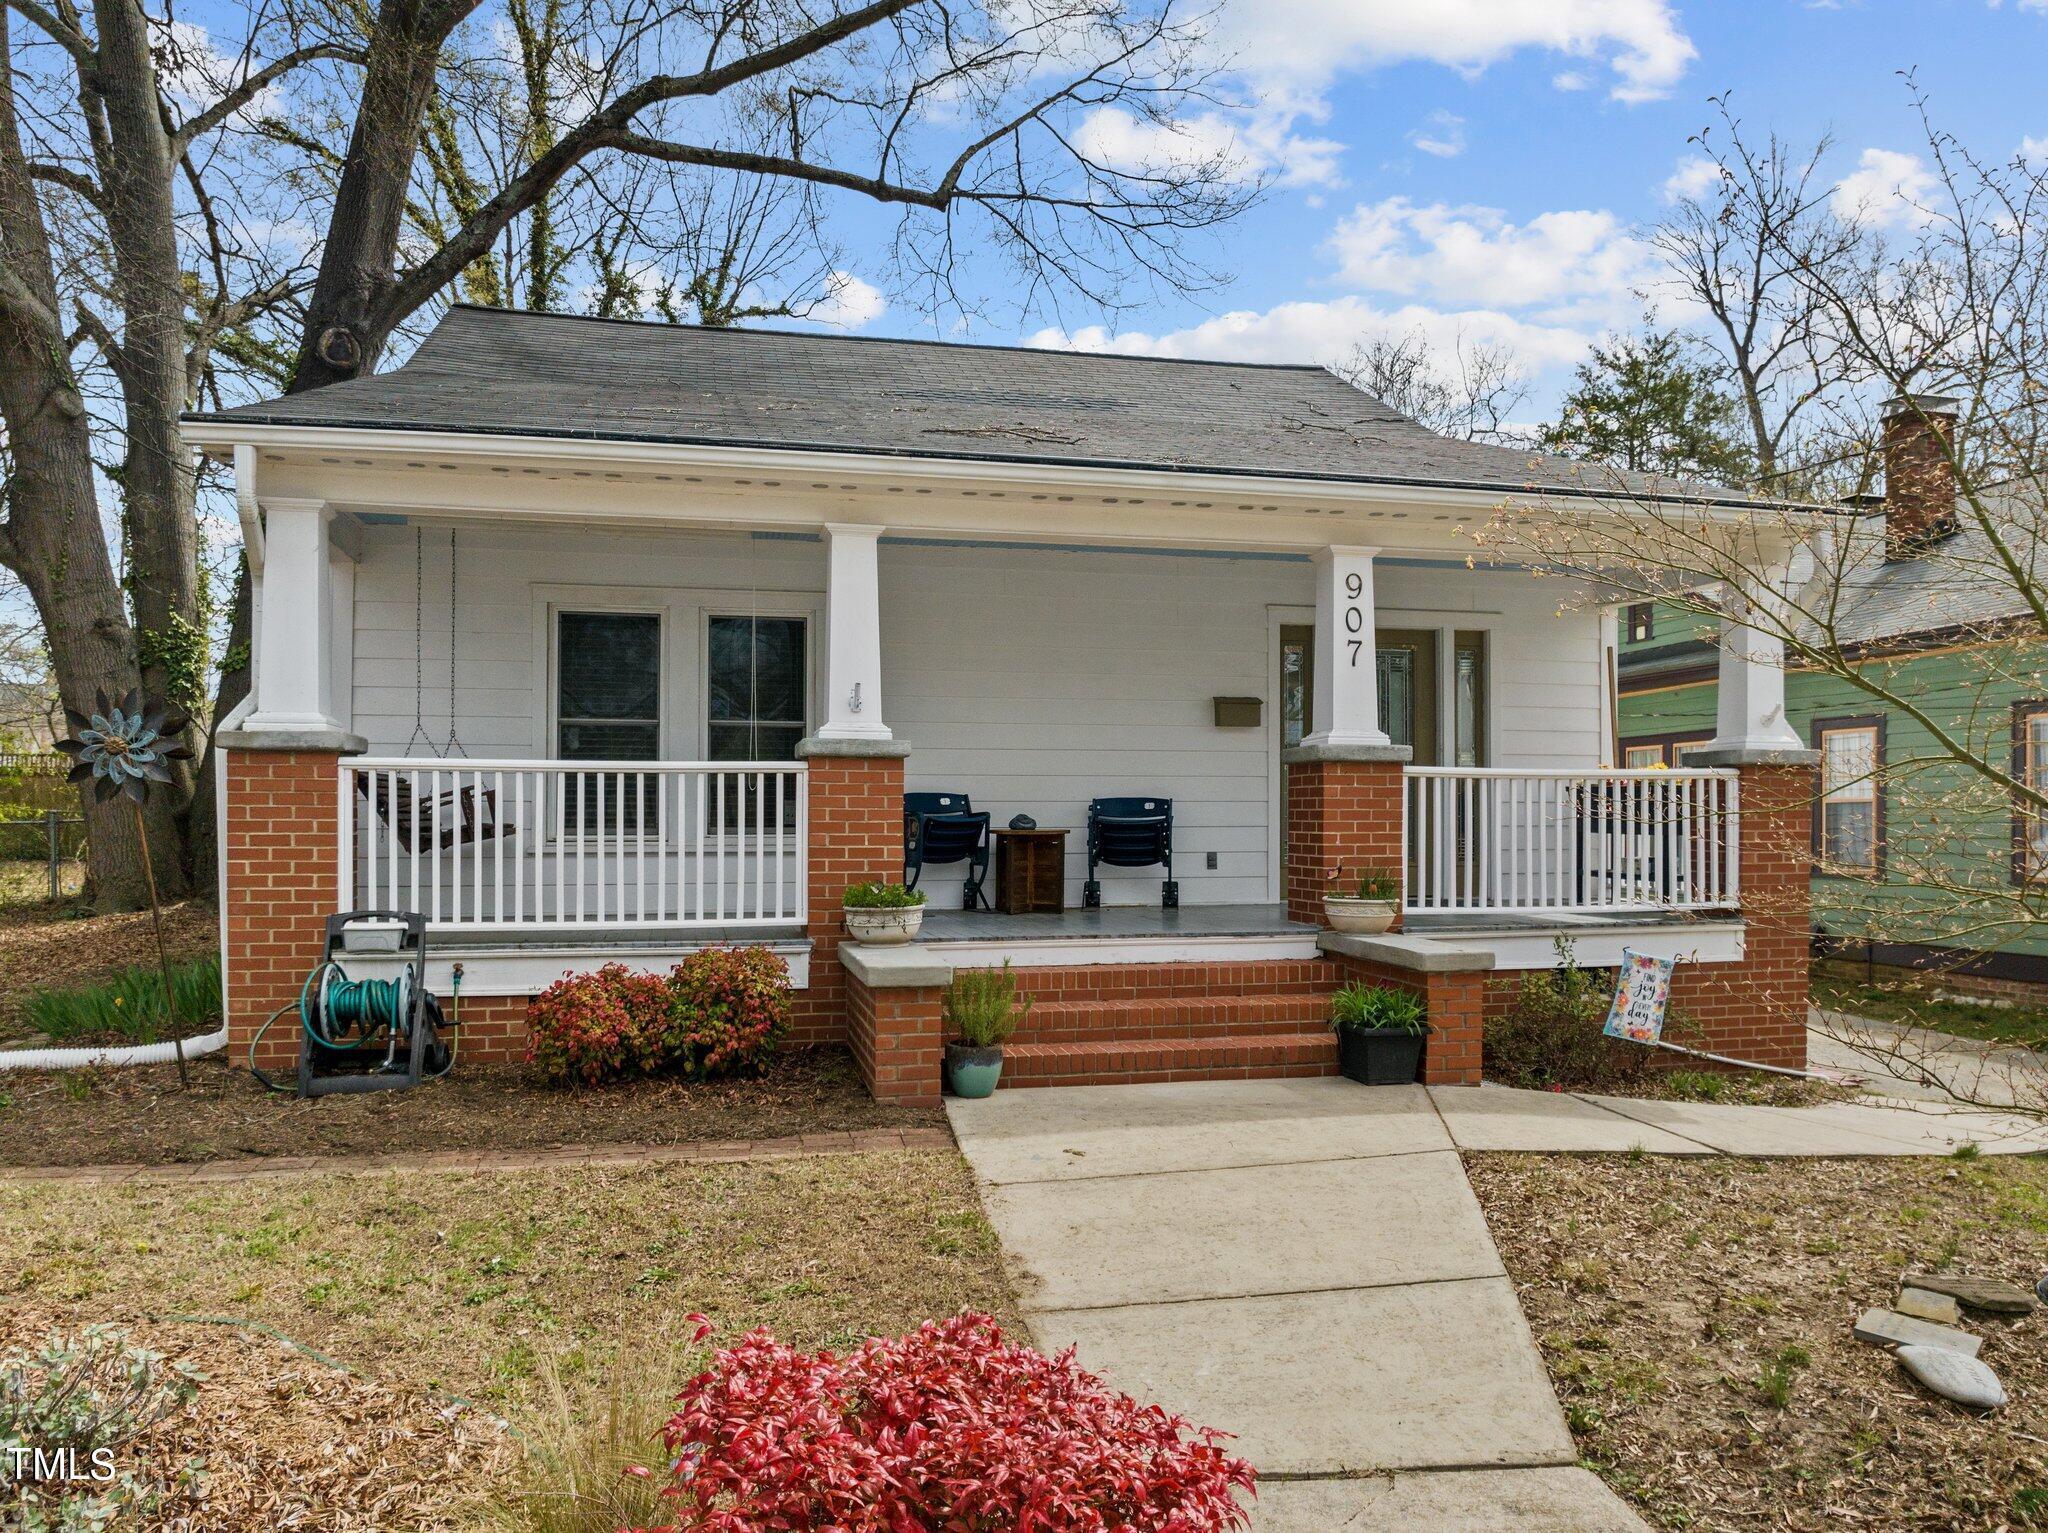 Photo one of 907 Arnette Ave Durham NC 27701 | MLS 10021218